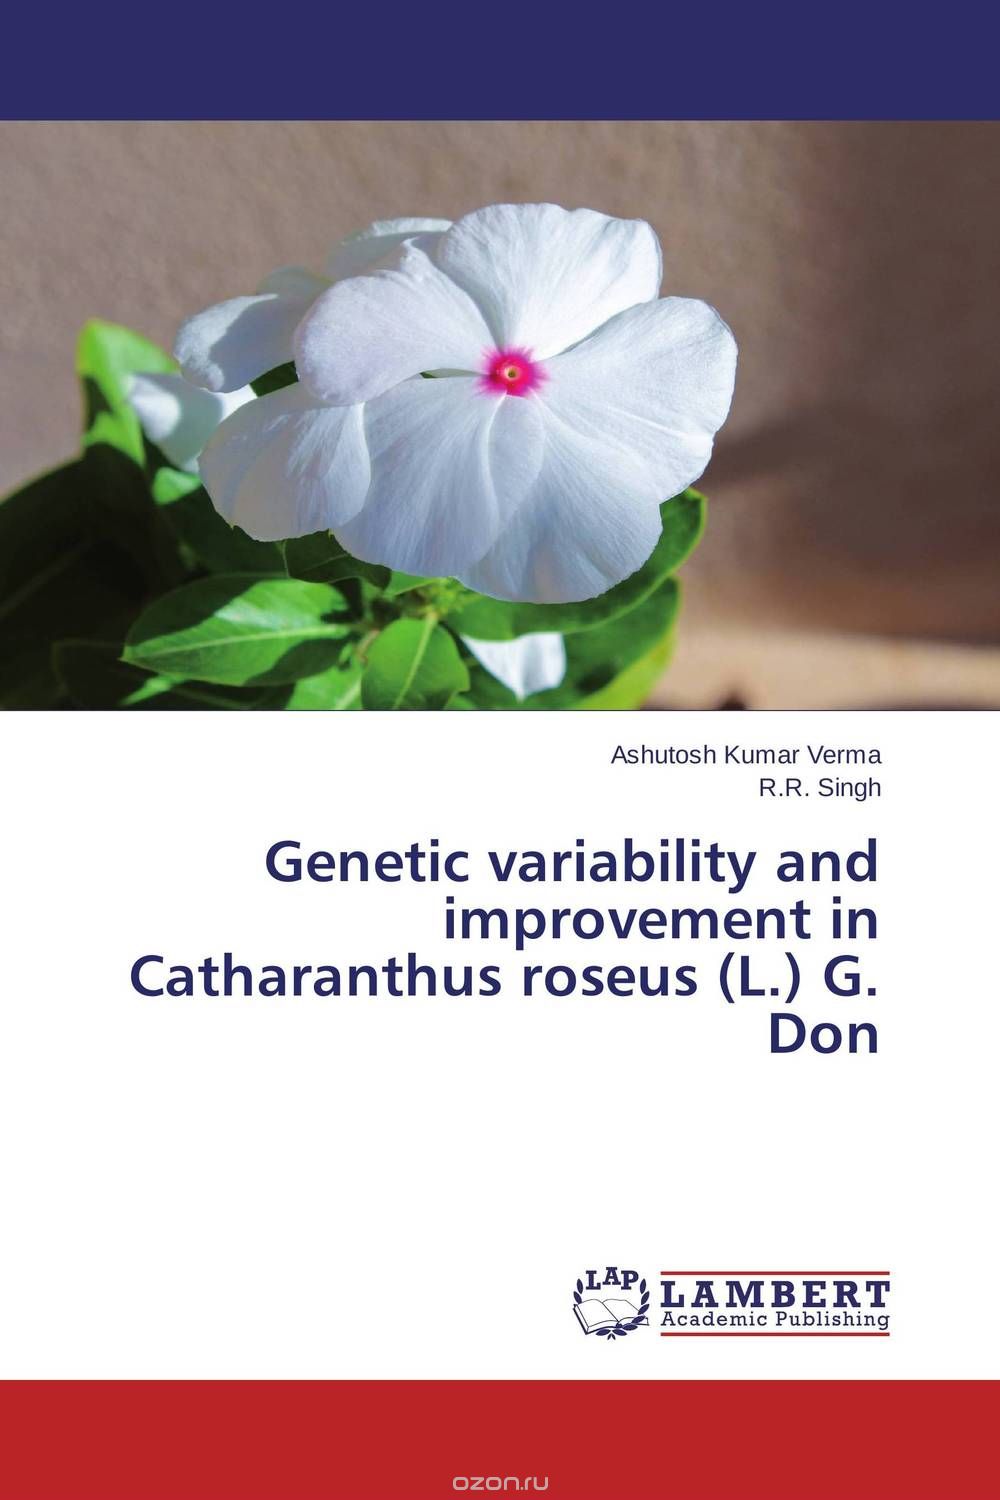 Genetic variability and improvement in Catharanthus roseus (L.) G. Don